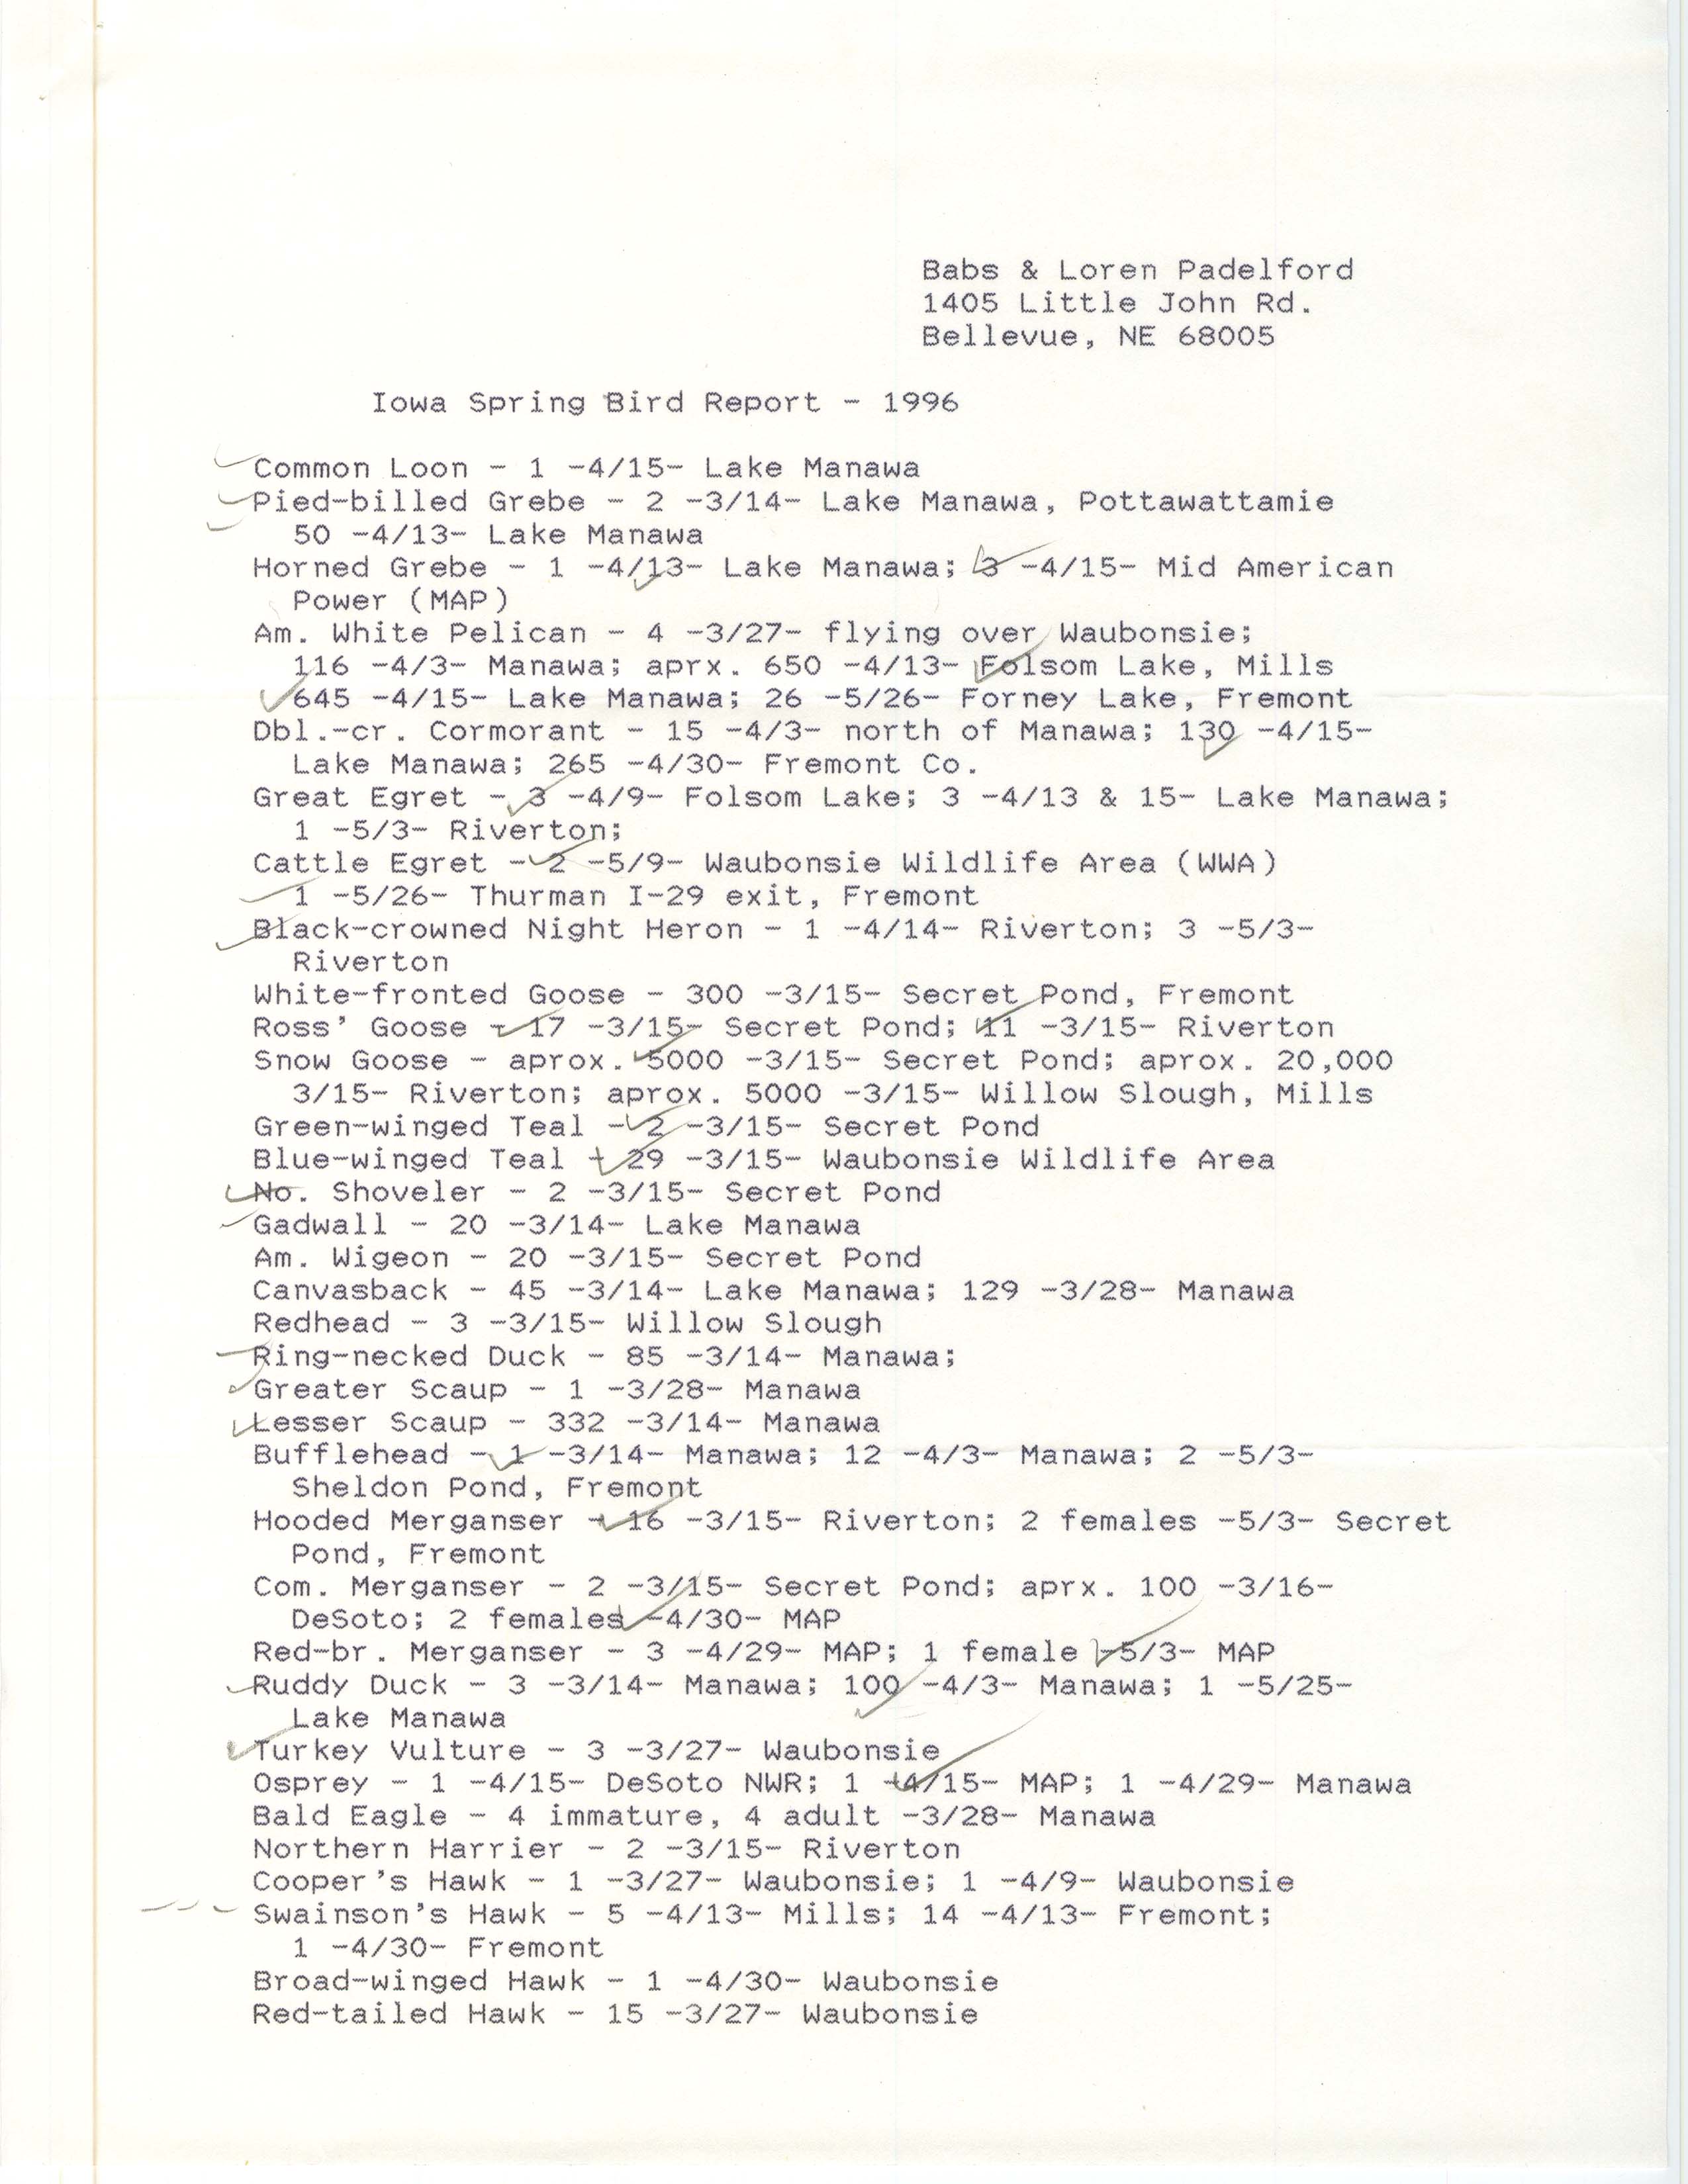 Iowa spring bird report contributed by Babs Padelford and Loren Padelford, spring 1996